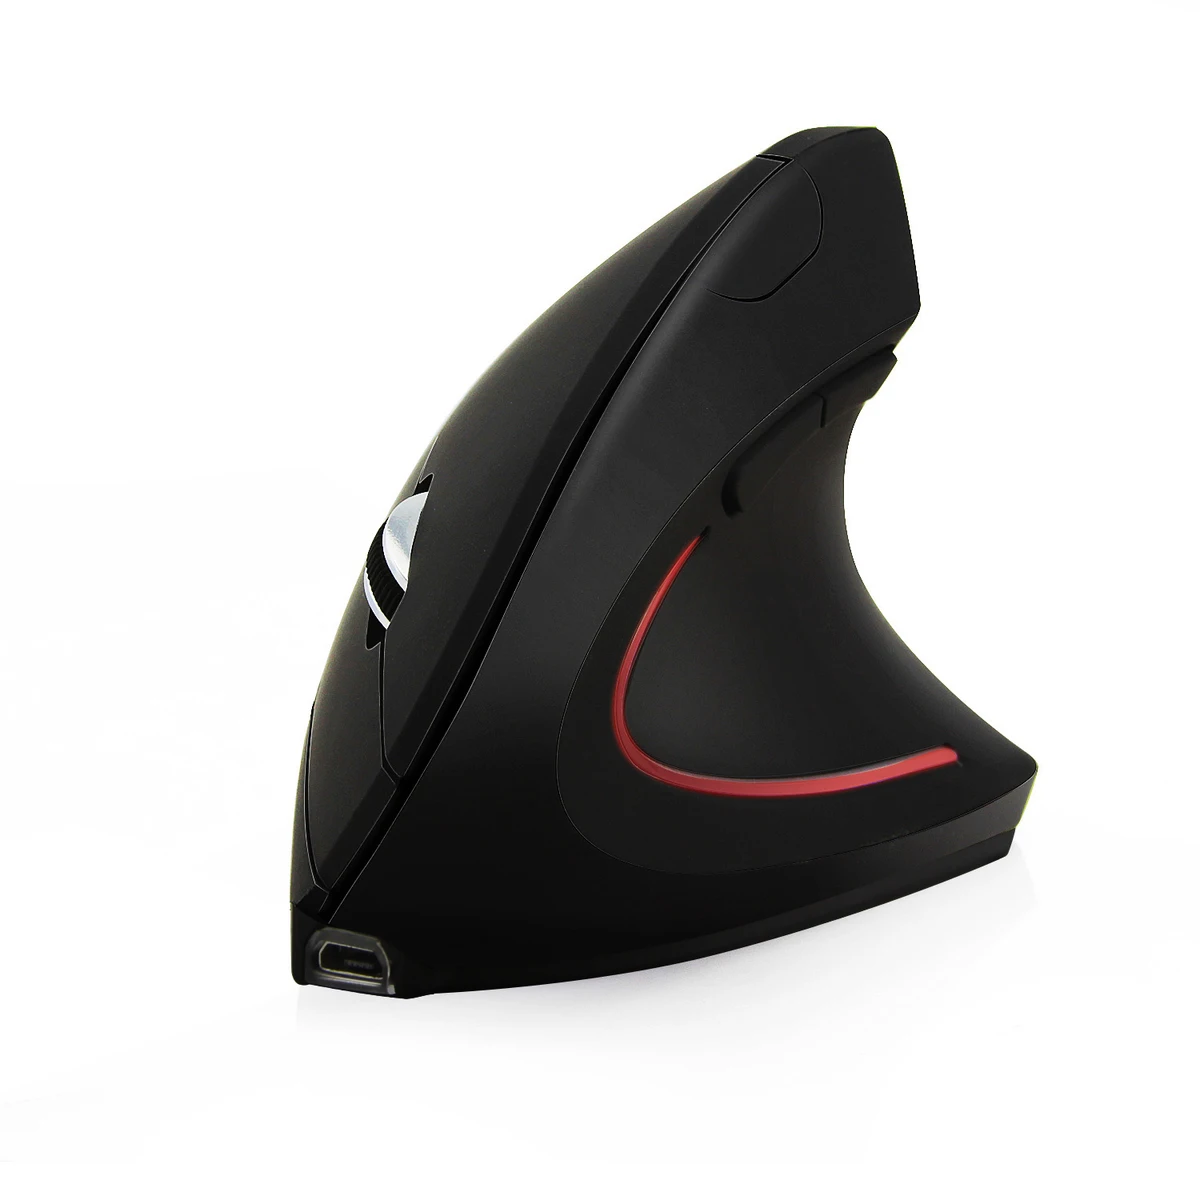 wireless rechargeable vertical mouse